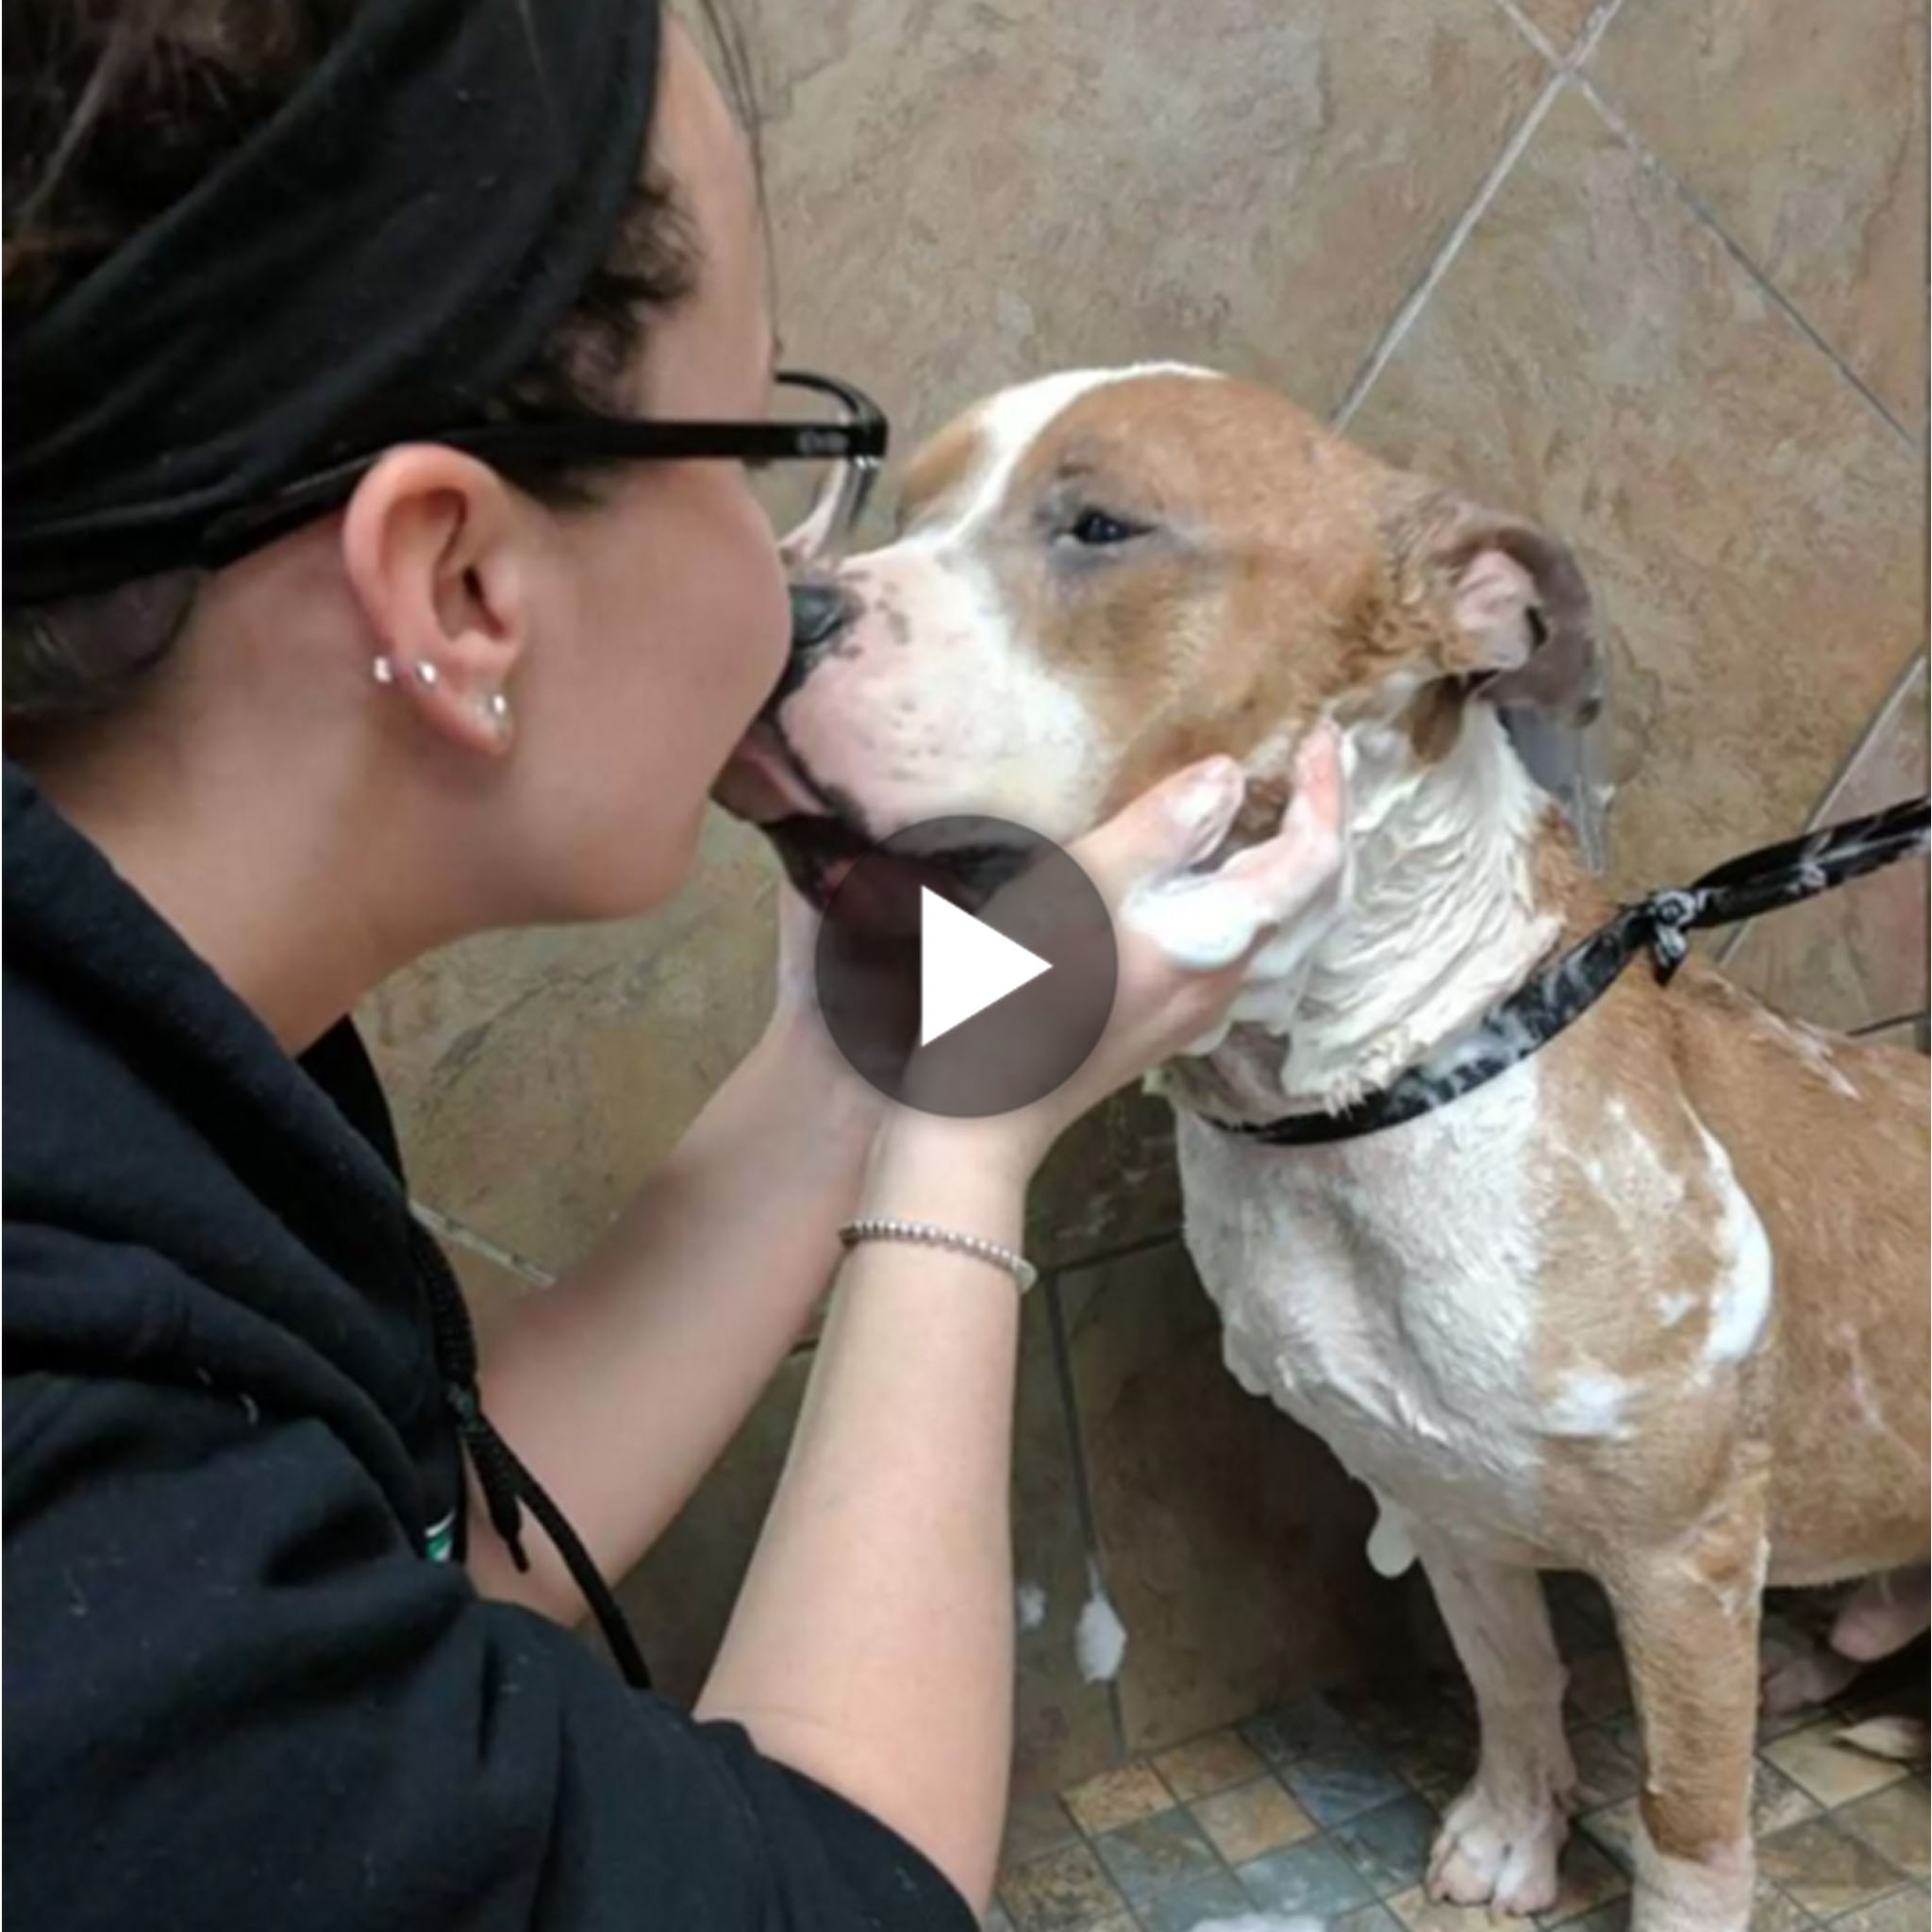 tho “After adopting a forlorn Pitbull from a shelter, a woman witnesses the dog’s overwhelming gratitude as he expresses it through constant and affectionate hugs, showcasing the deep bond formed between them.” tho